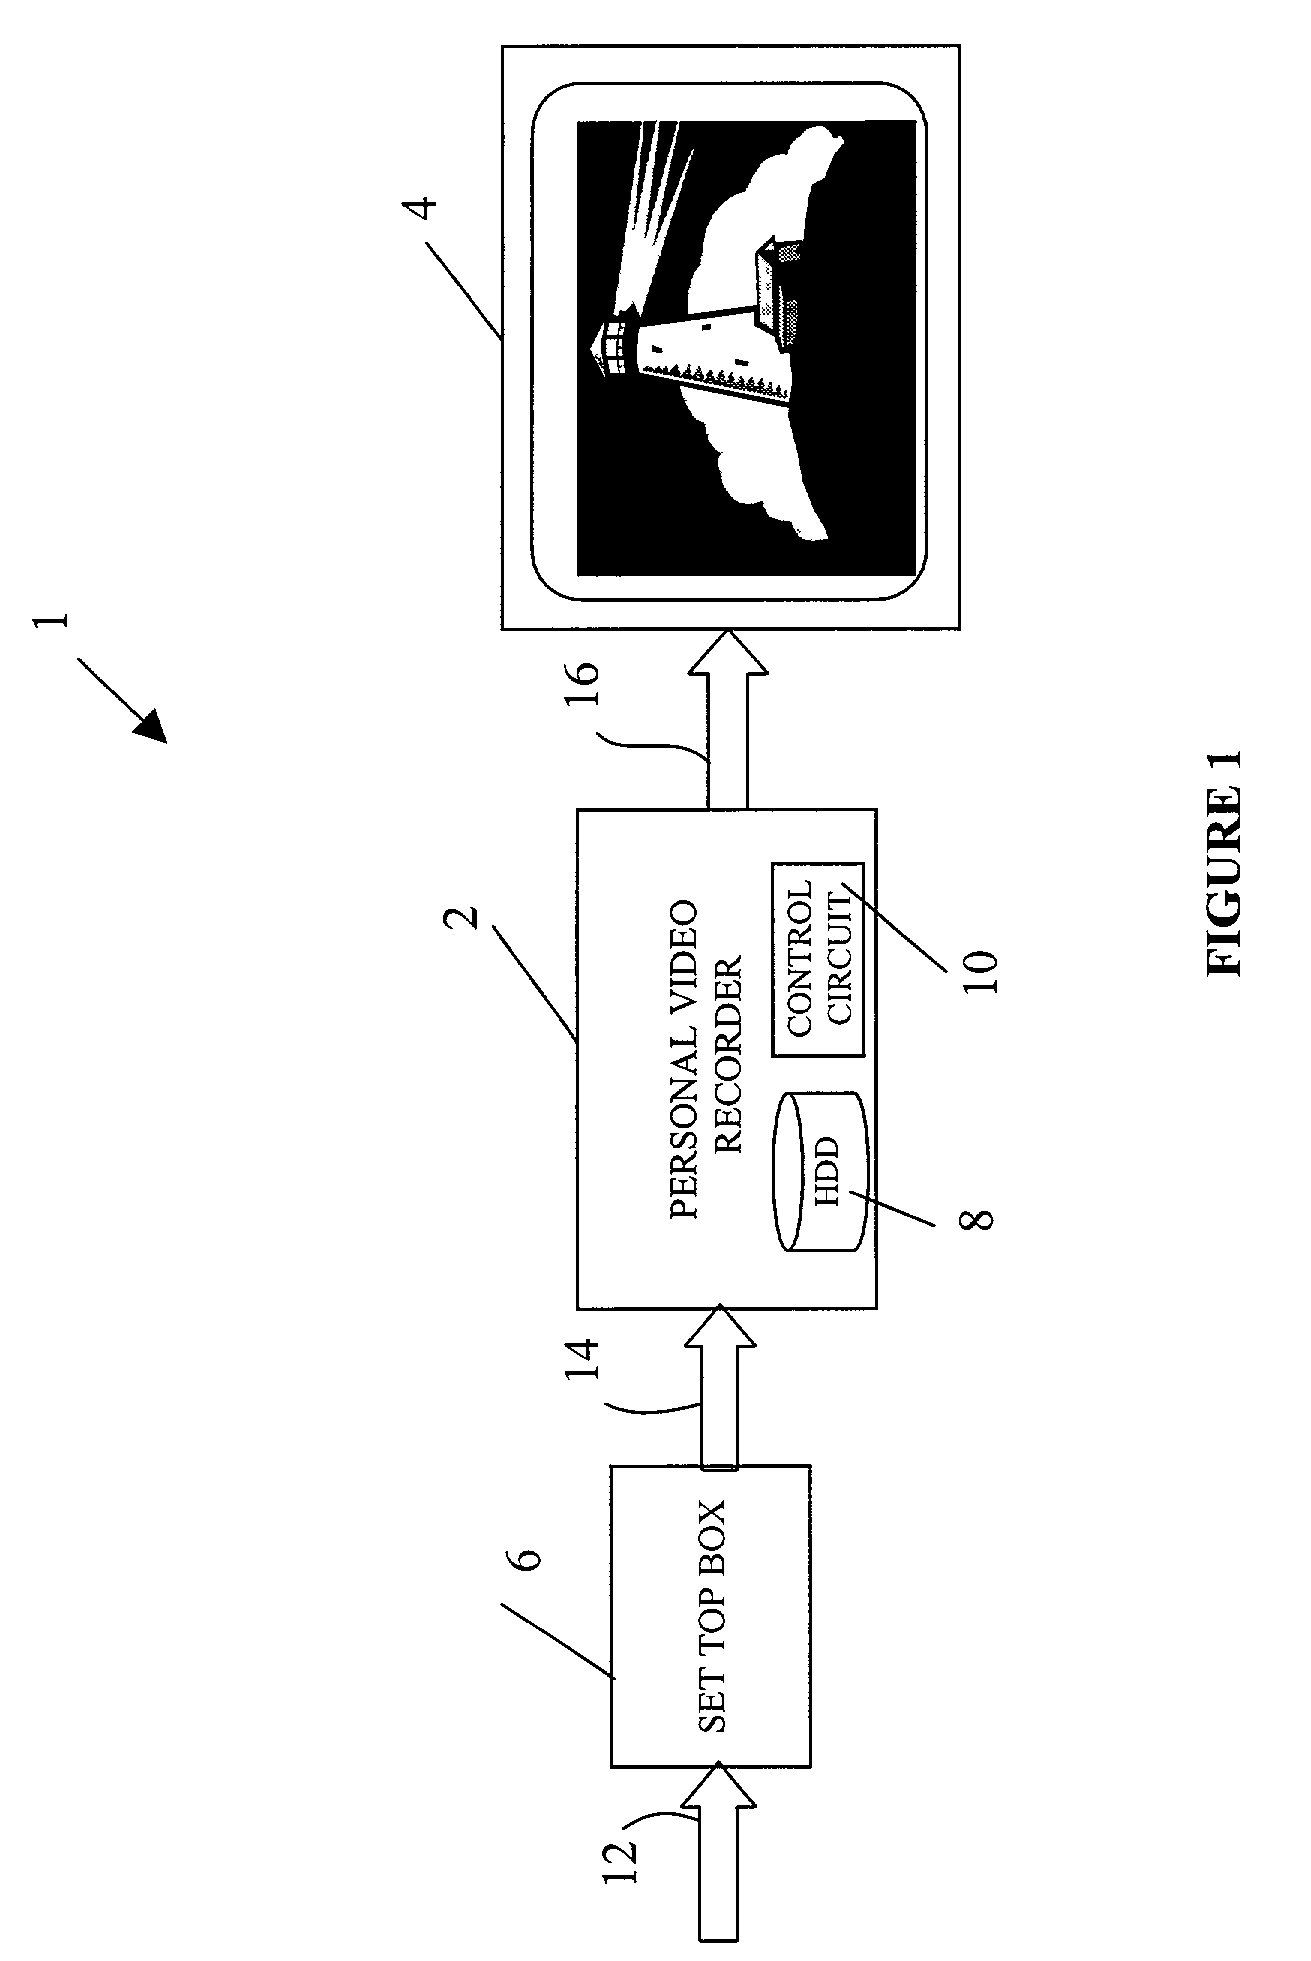 Method and apparatus for storing a stream of video data on a storage medium